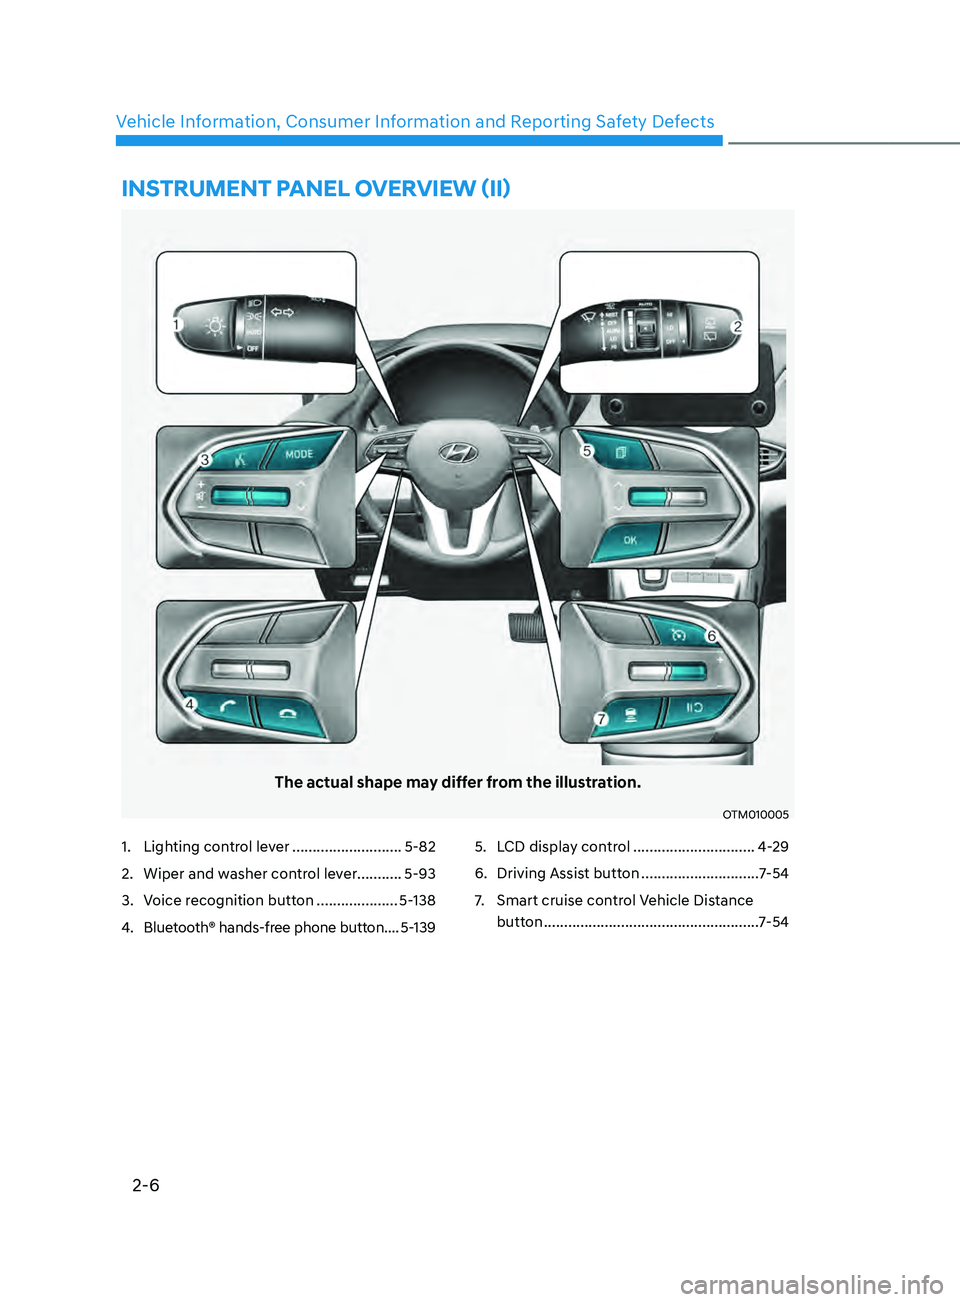 HYUNDAI SANTA FE CALLIGRAPHY 2021 User Guide 2-6
Vehicle Information, Consumer Information and Reporting Safety Defects
The actual shape may differ from the illustration.
OTM010005
1. Lighting control lever ...........................5-82
2.
 Wi